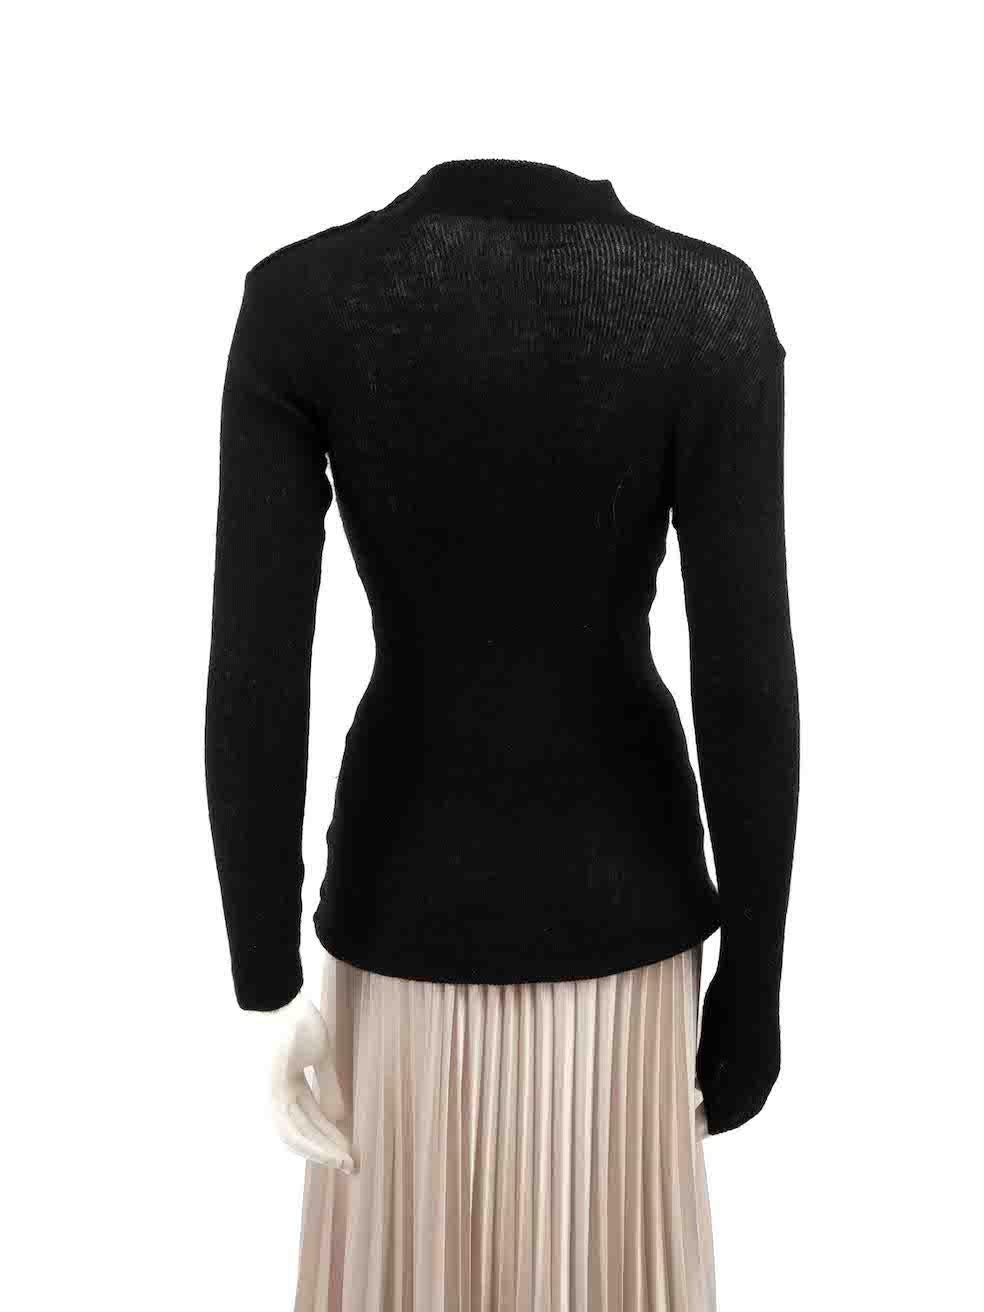 Balmain Black Wool Button Detail Jumper Size M In Good Condition For Sale In London, GB